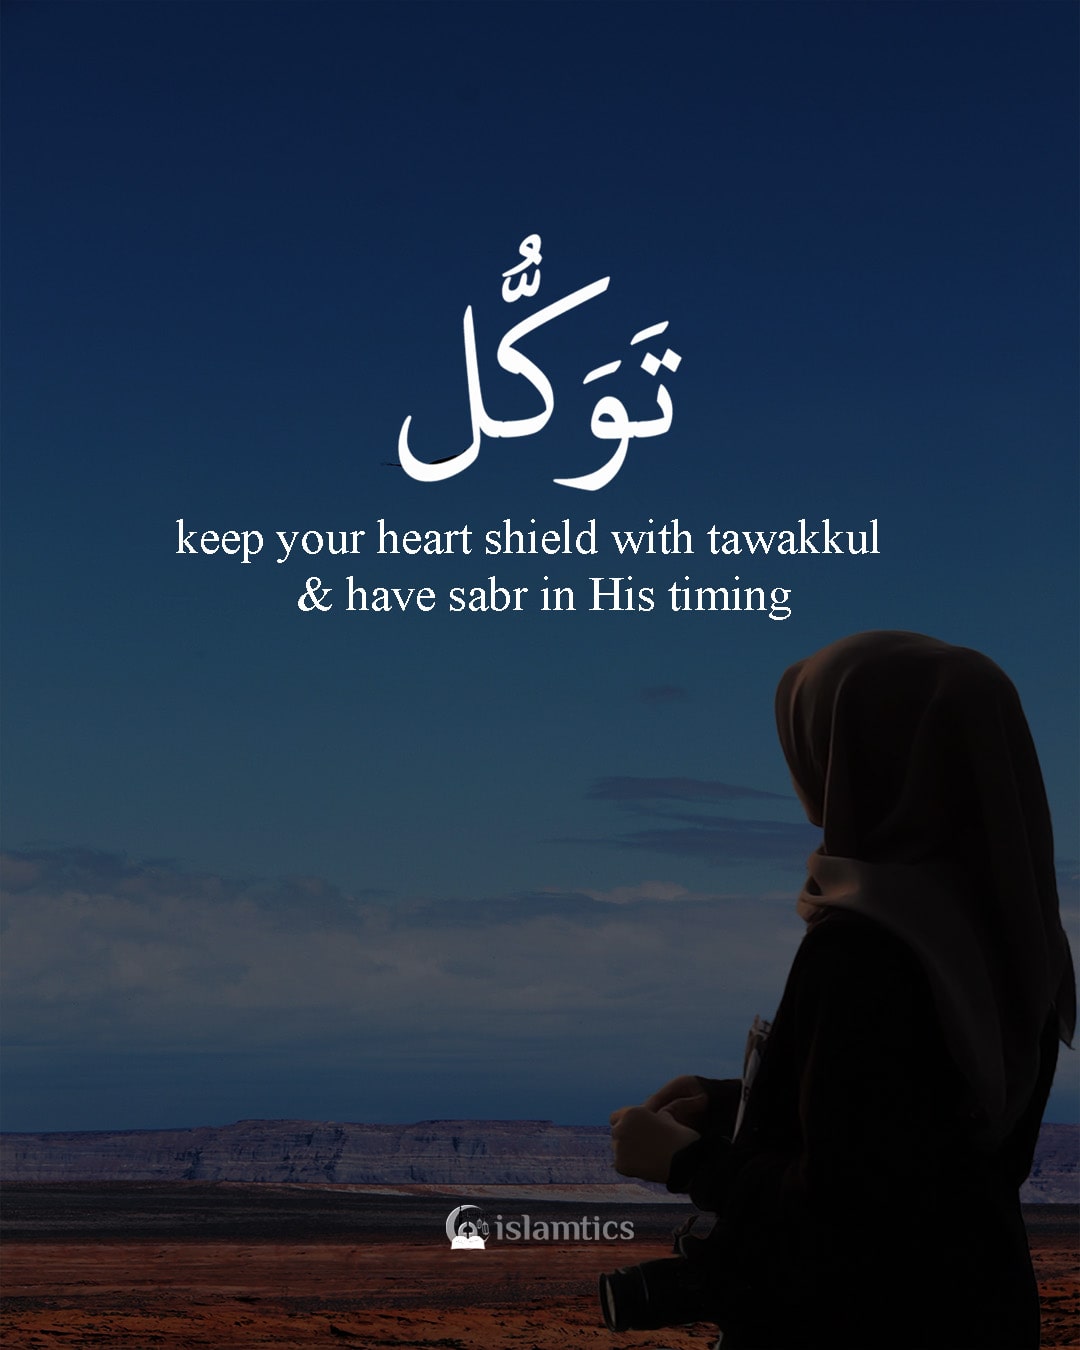 keep your heart shield with tawakkul & have sabr in His timing ...